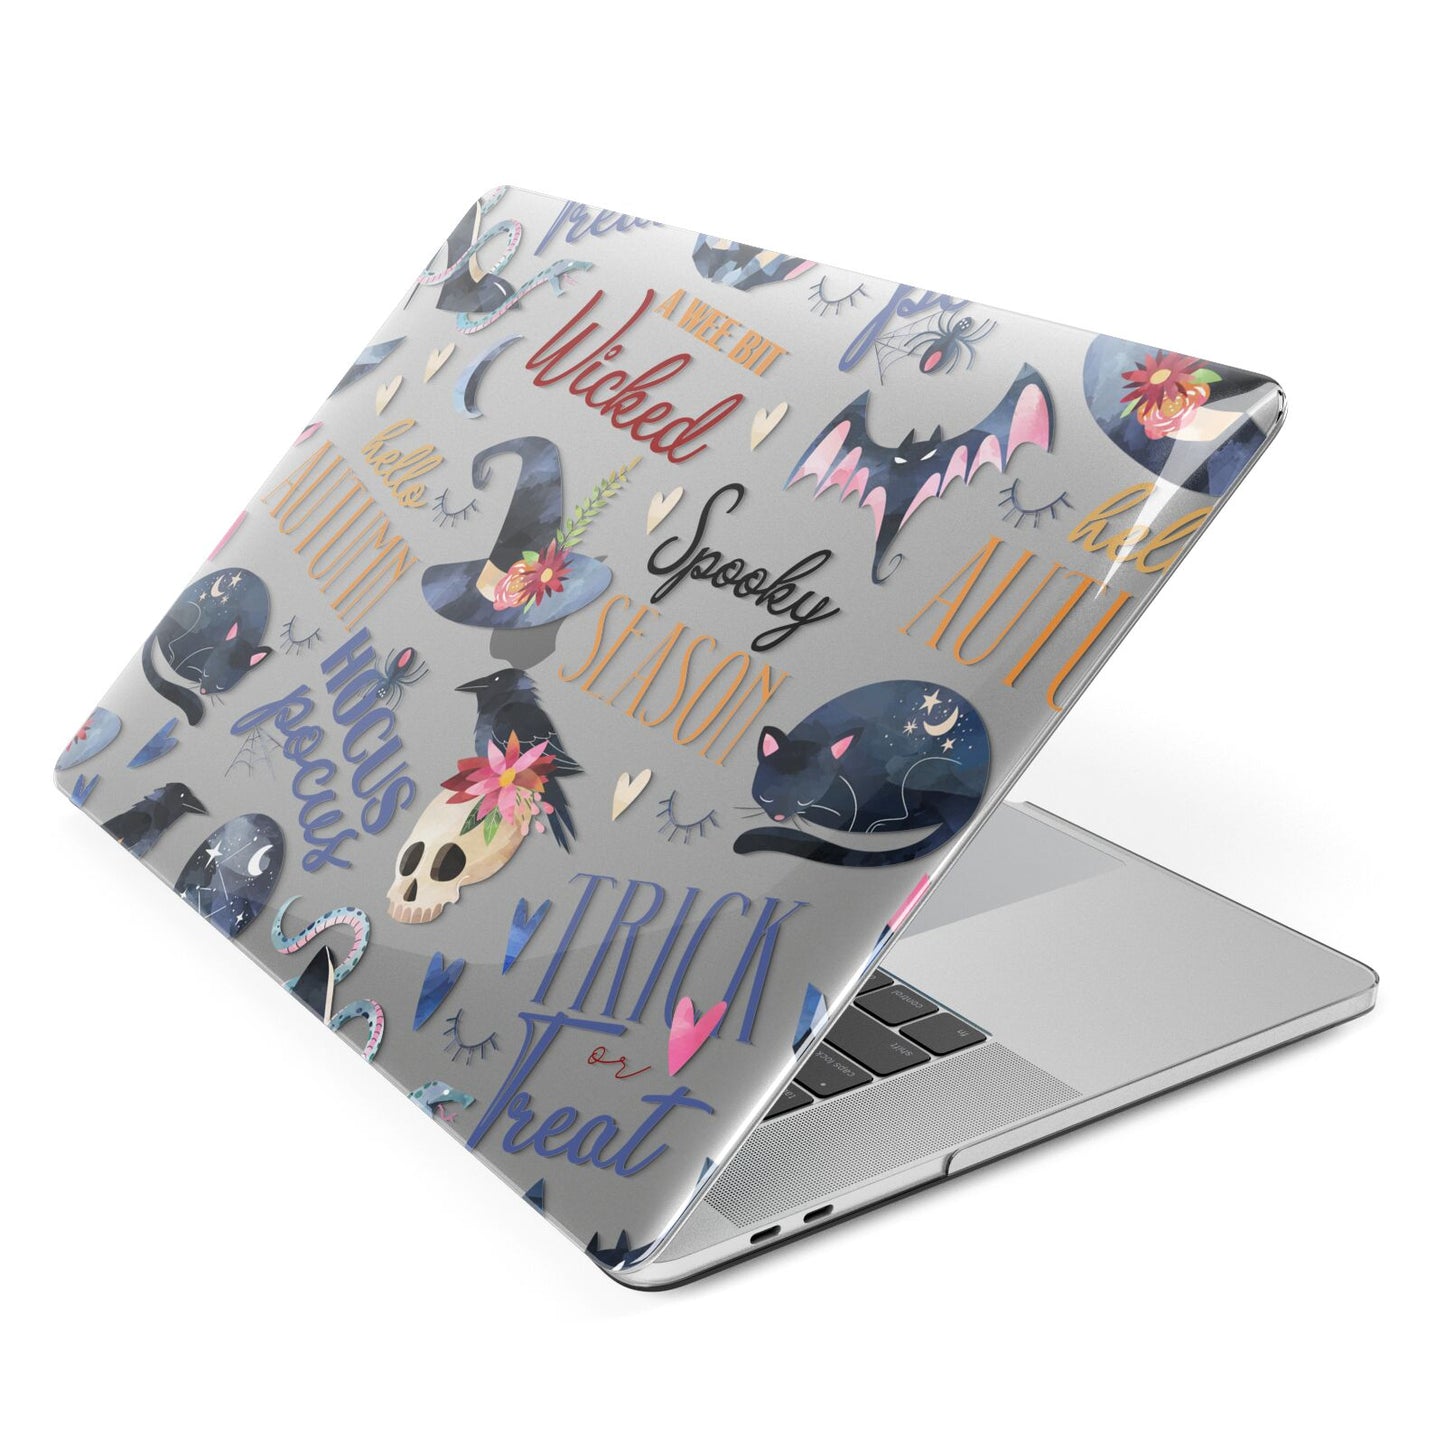 Fun Halloween Catchphrases and Watercolour Illustrations Apple MacBook Case Side View